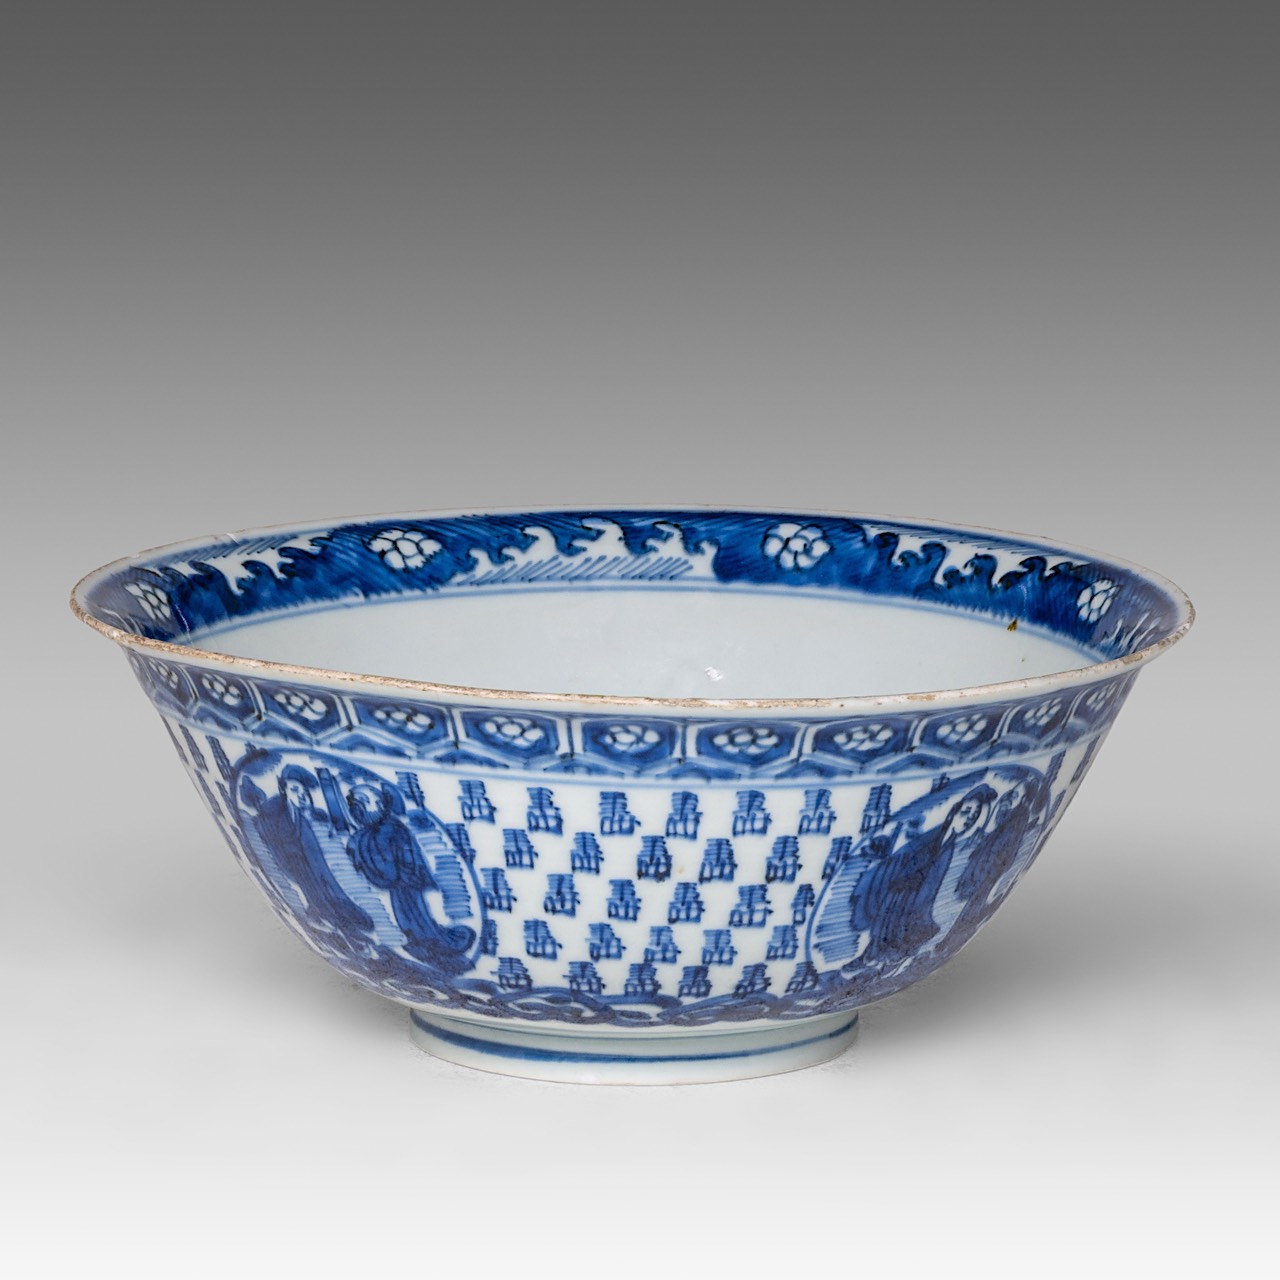 A Chinese blue and white 'Luohan' bowl, Wanli period, Ming dynasty, H 9 - dia 22,5 cm - Image 2 of 8